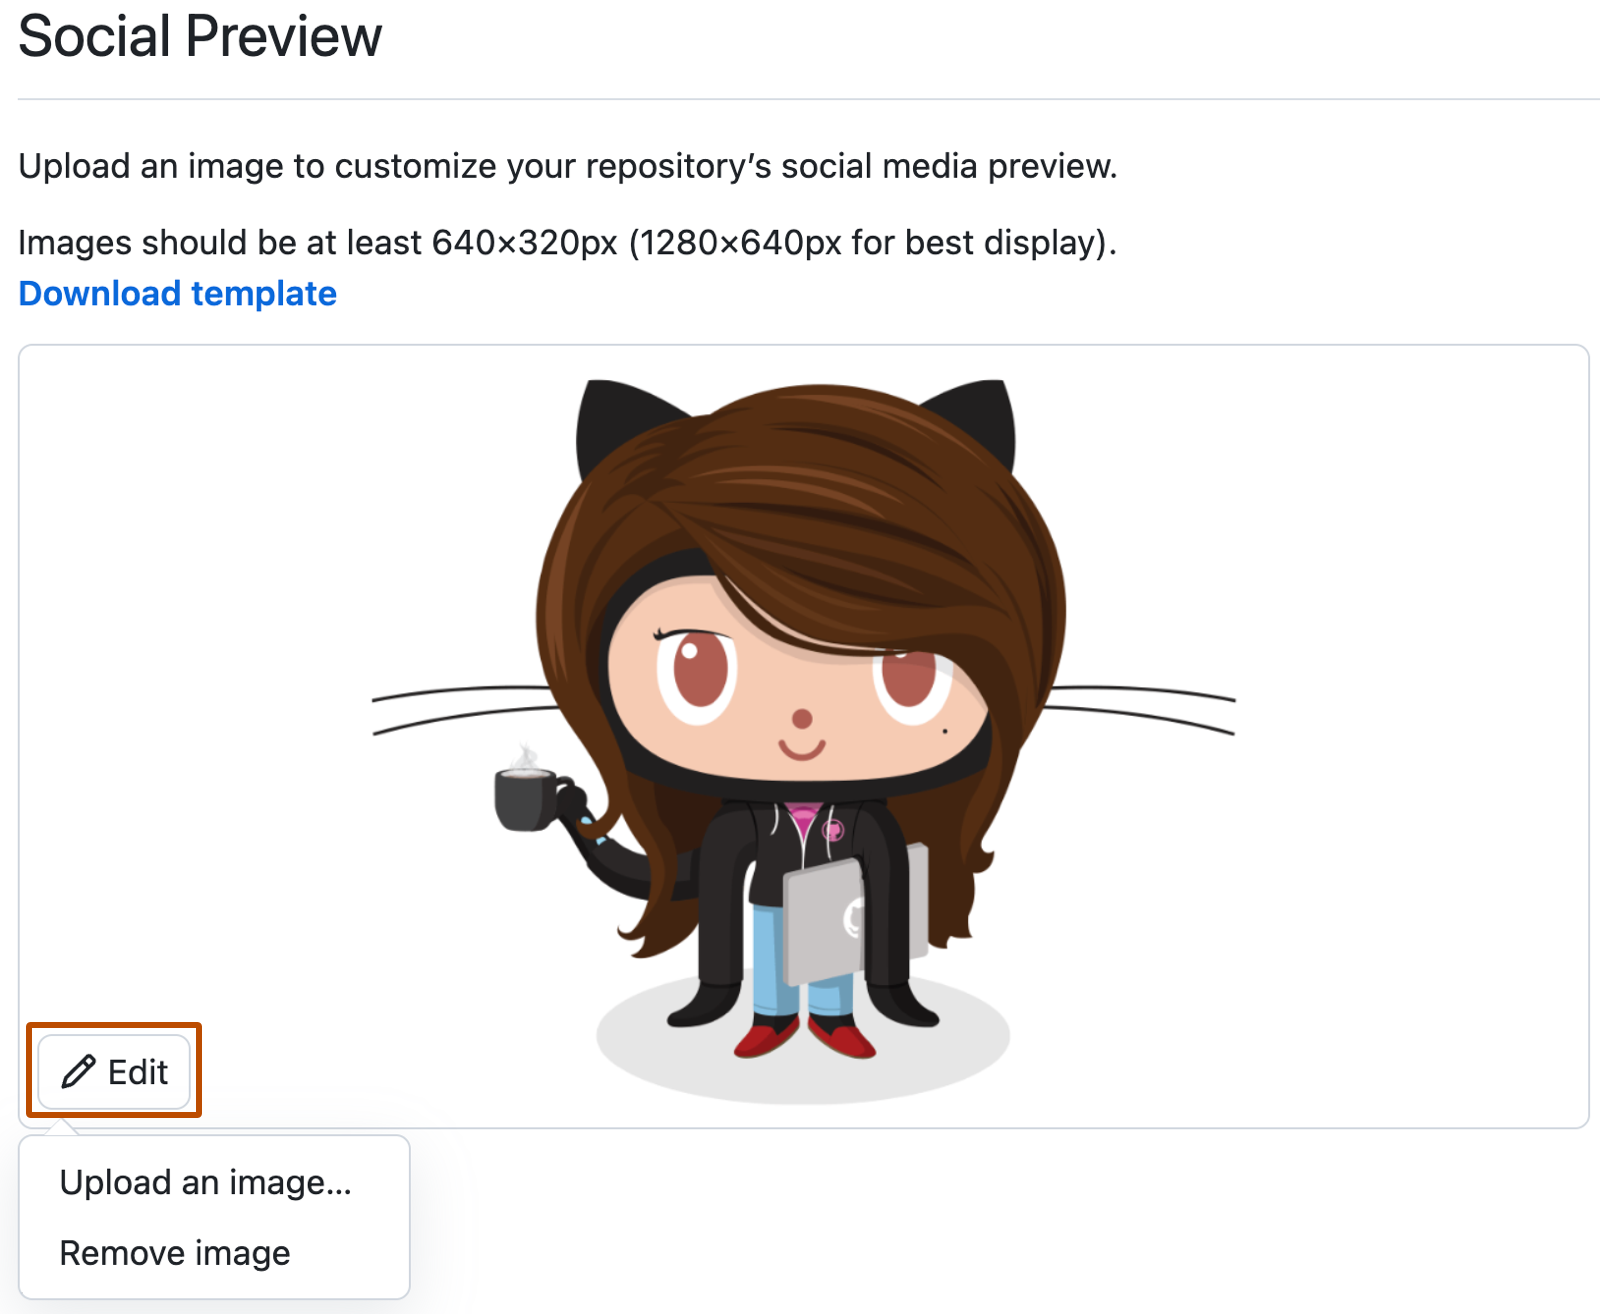 Screenshot of the "Social Preview" section. The "Edit" button is highlighted with an orange outline, and a dropdown displays the options for uploading or removing an image.